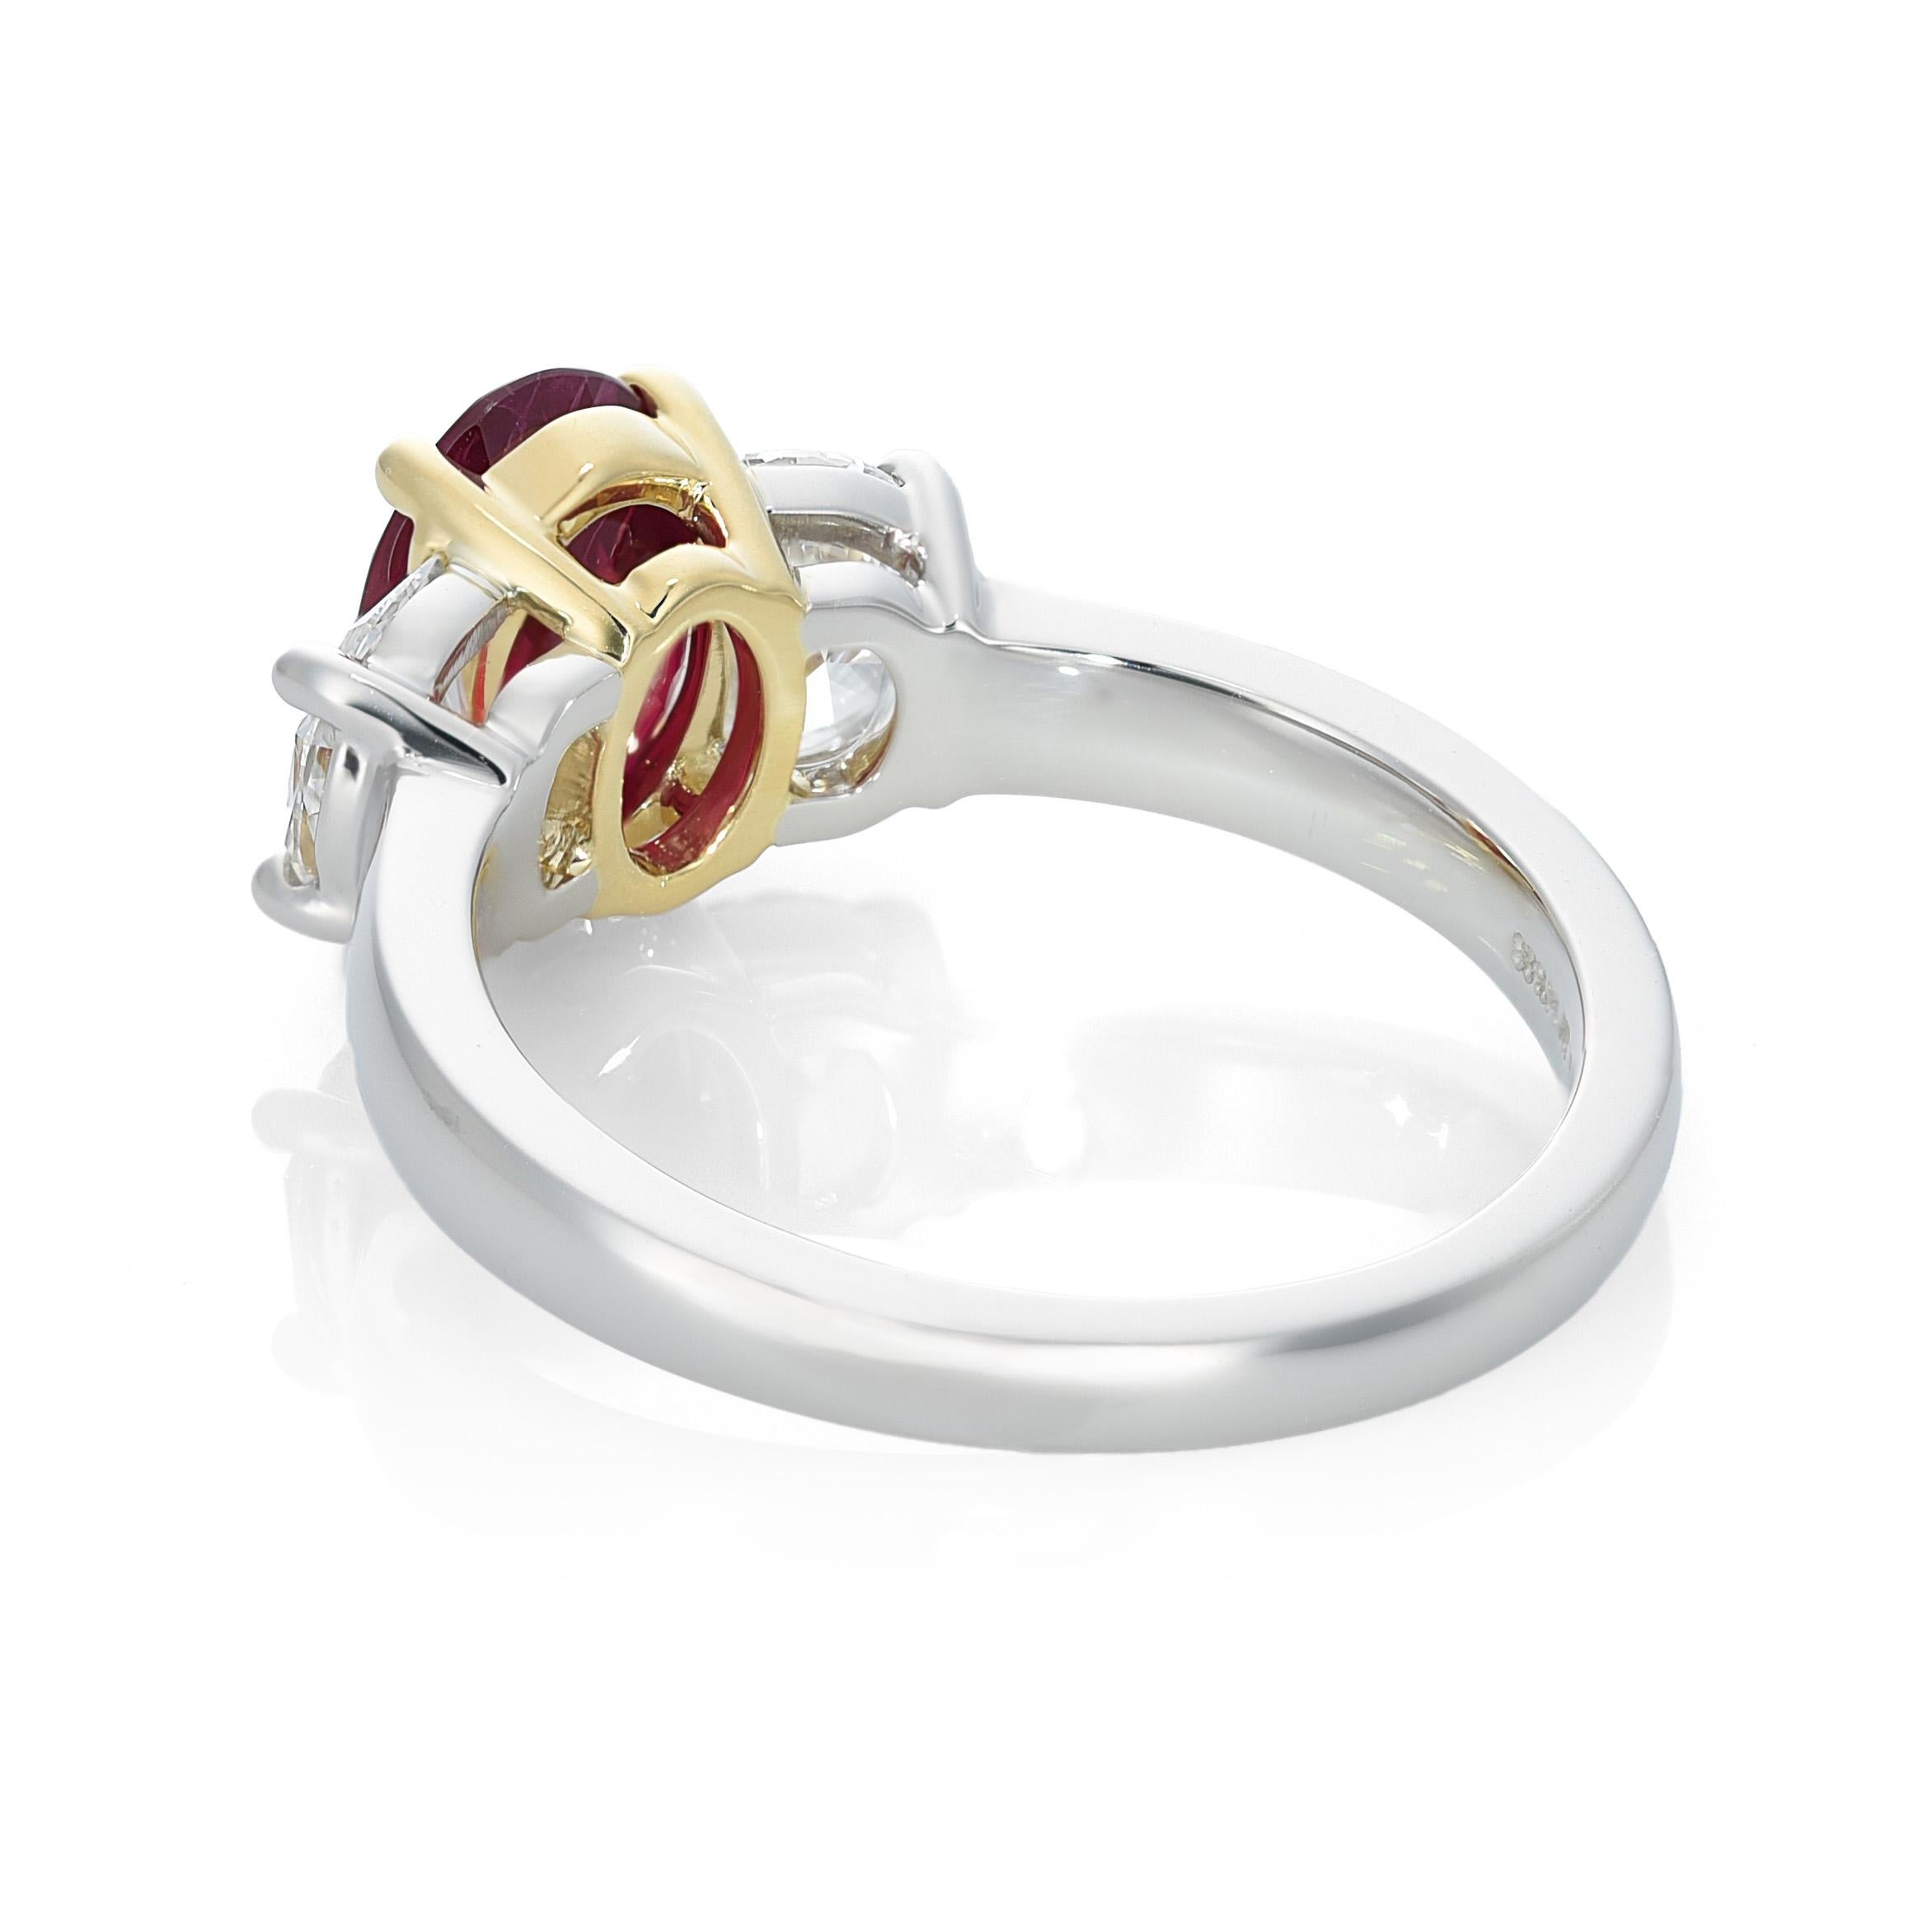 GIA Certified 2.02 Carats Ruby Diamonds set in 18K Yellow Gold and Platinum Ring For Sale 1